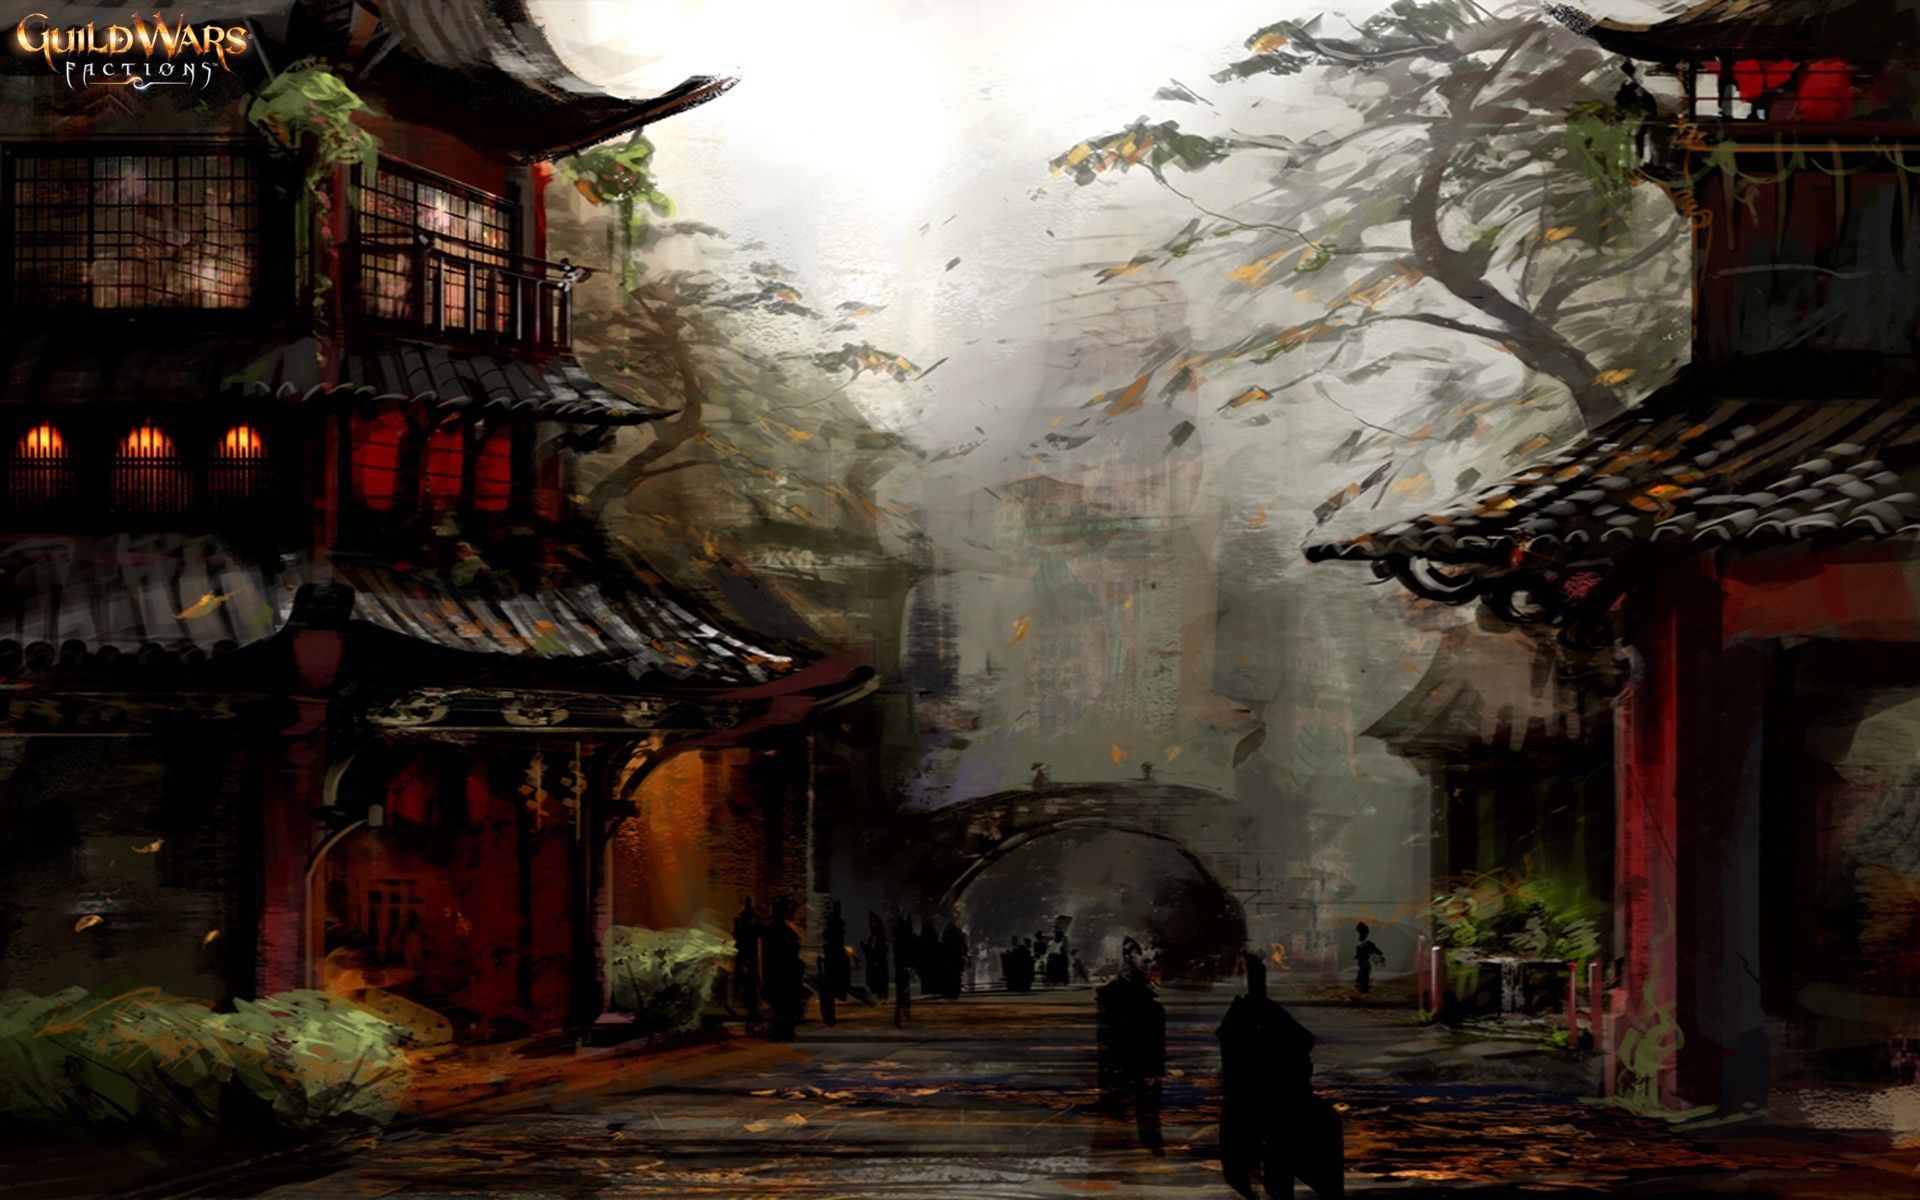 Guild Wars 2 concept art of a foggy street in a Japanese town - Chinese